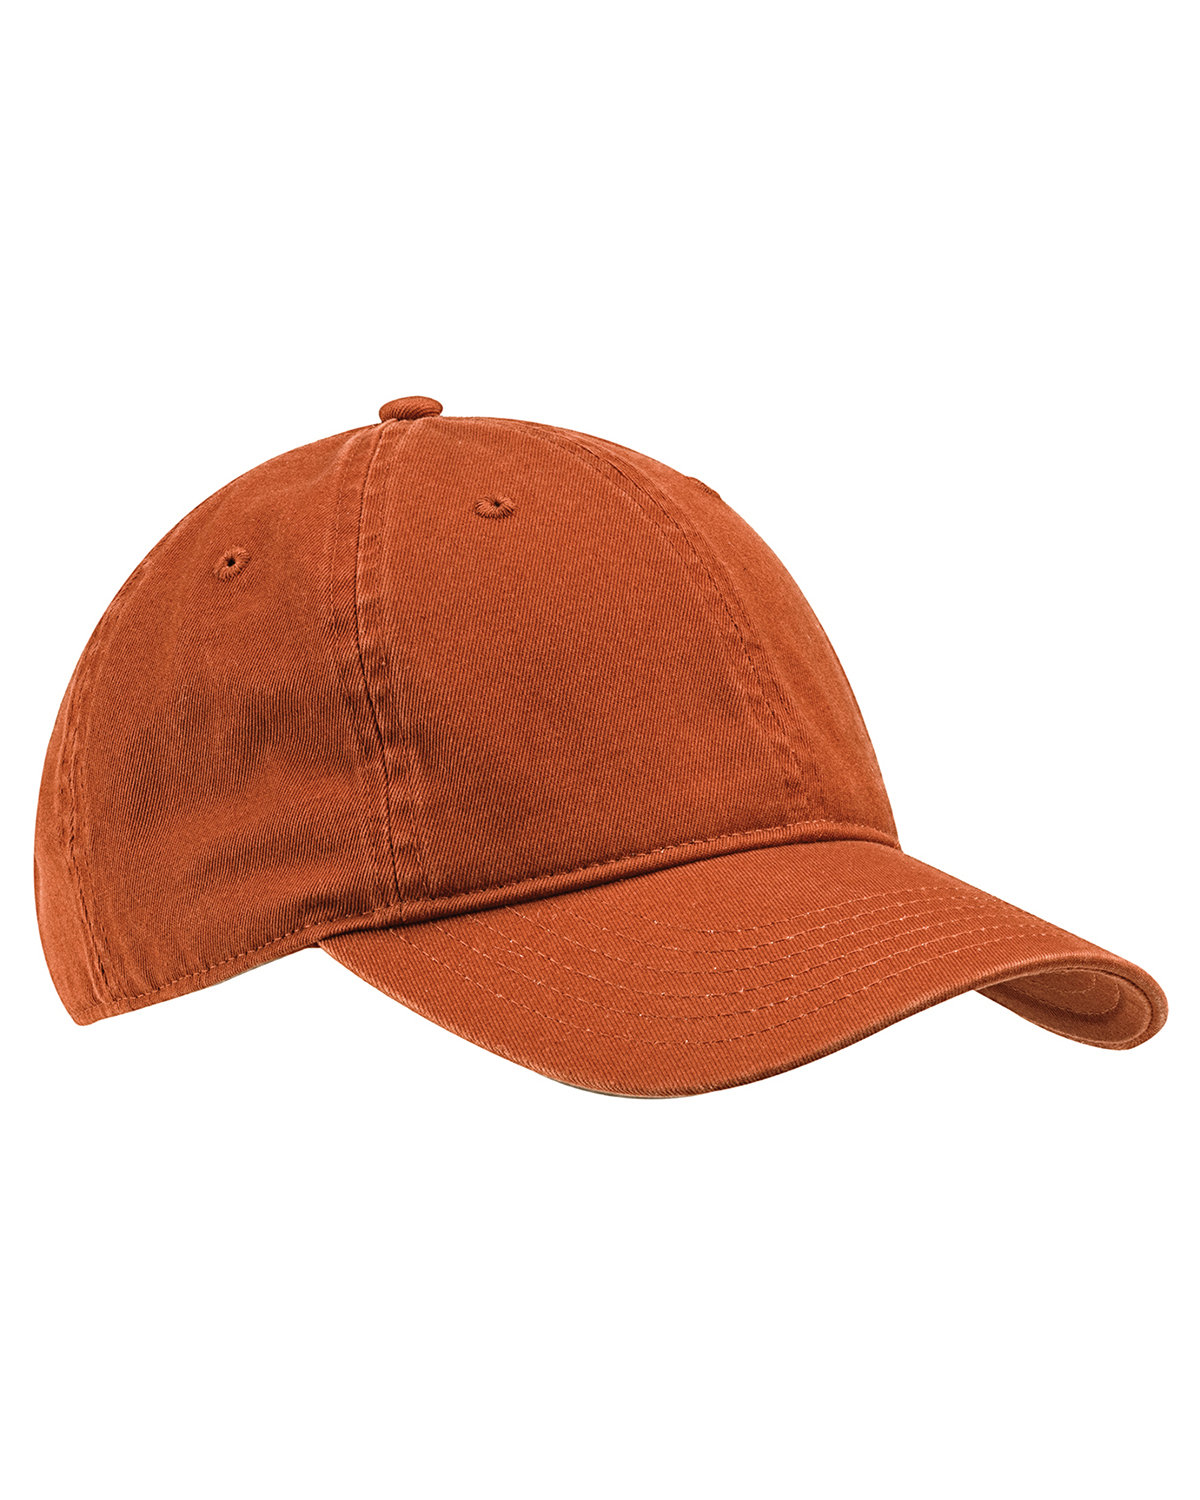 econscious Organic Cotton Twill Unstructured Baseball Hat PICANTE 